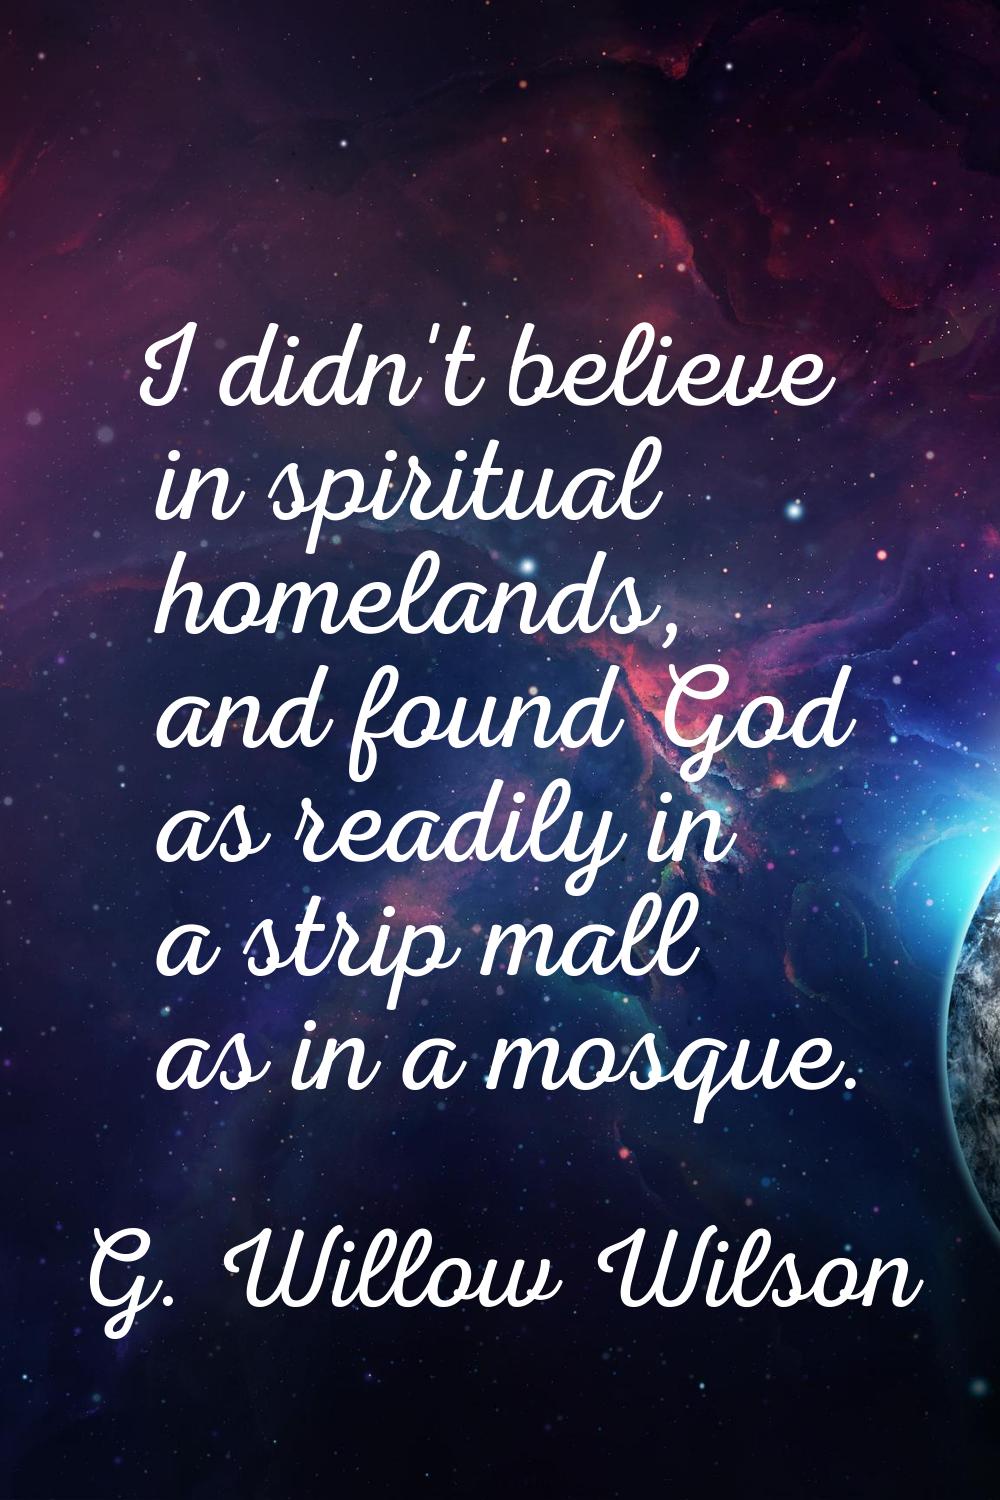 I didn't believe in spiritual homelands, and found God as readily in a strip mall as in a mosque.